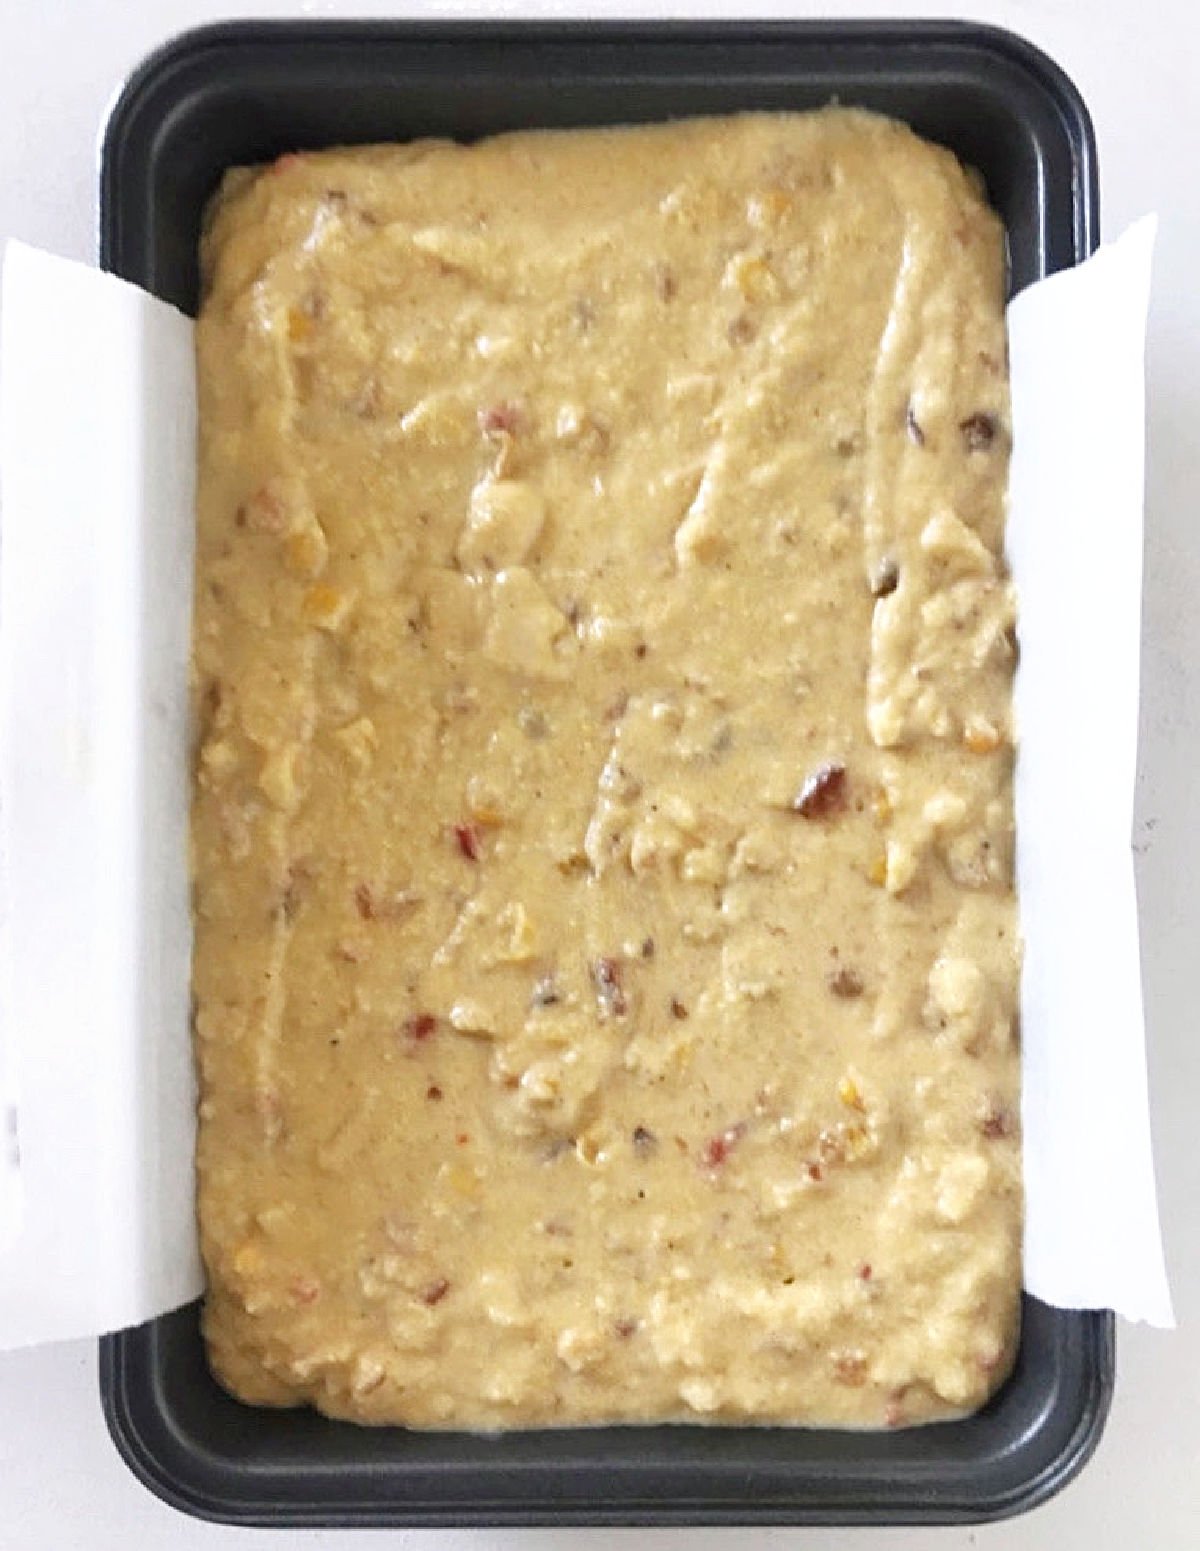 Cornbread batter in a rectangular dark metal pan with parchment paper on a white surface.